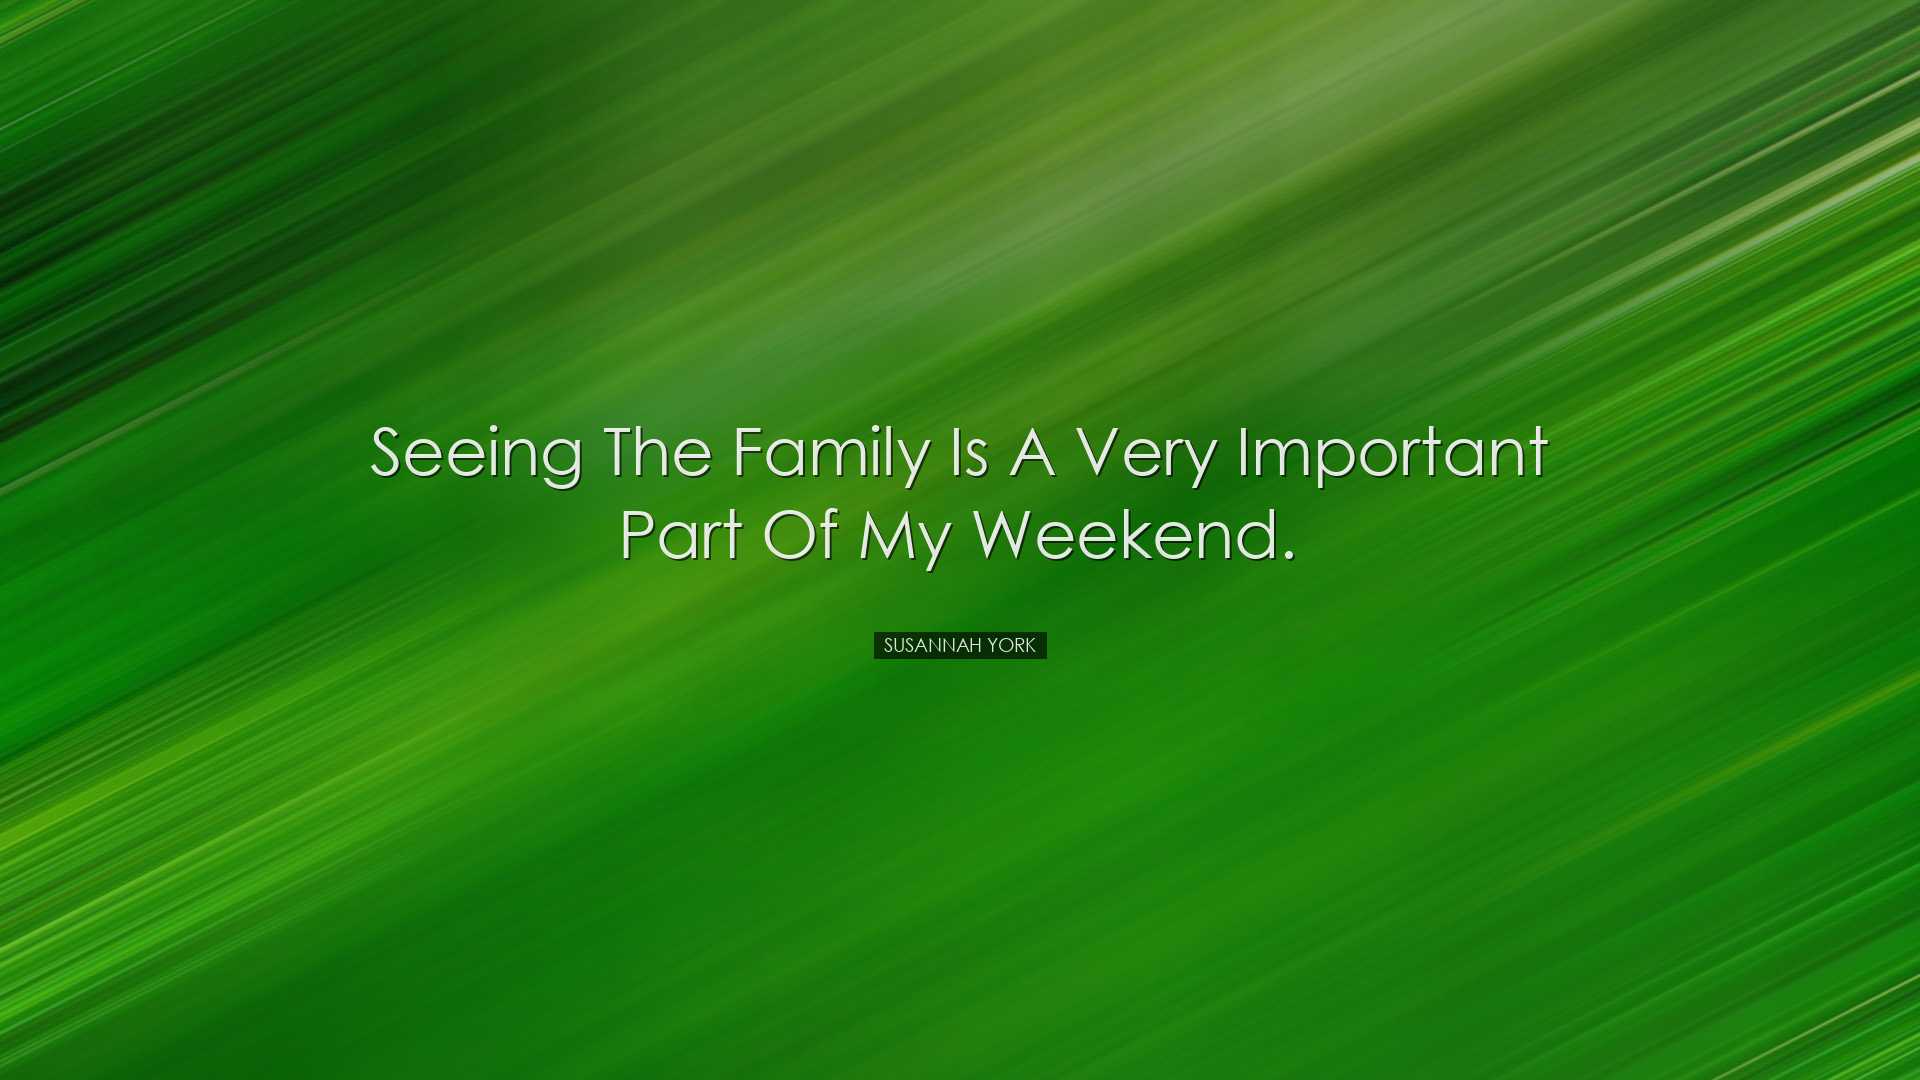 Seeing the family is a very important part of my weekend. - Susann